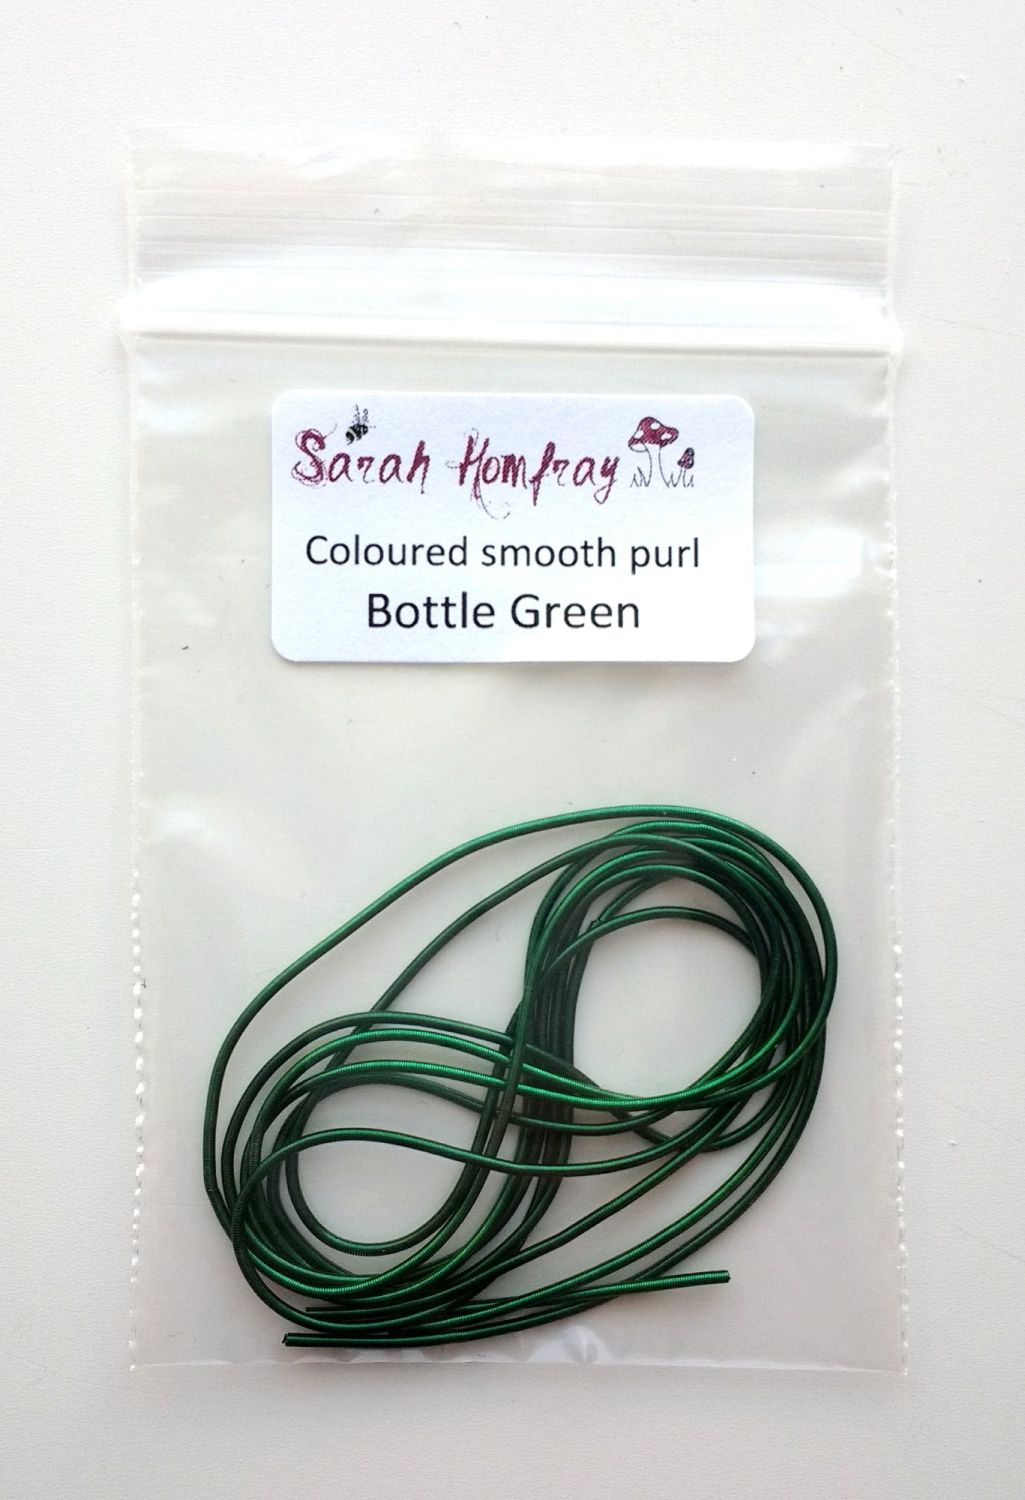 NEW! Coloured smooth purl no.6 - Bottle Green